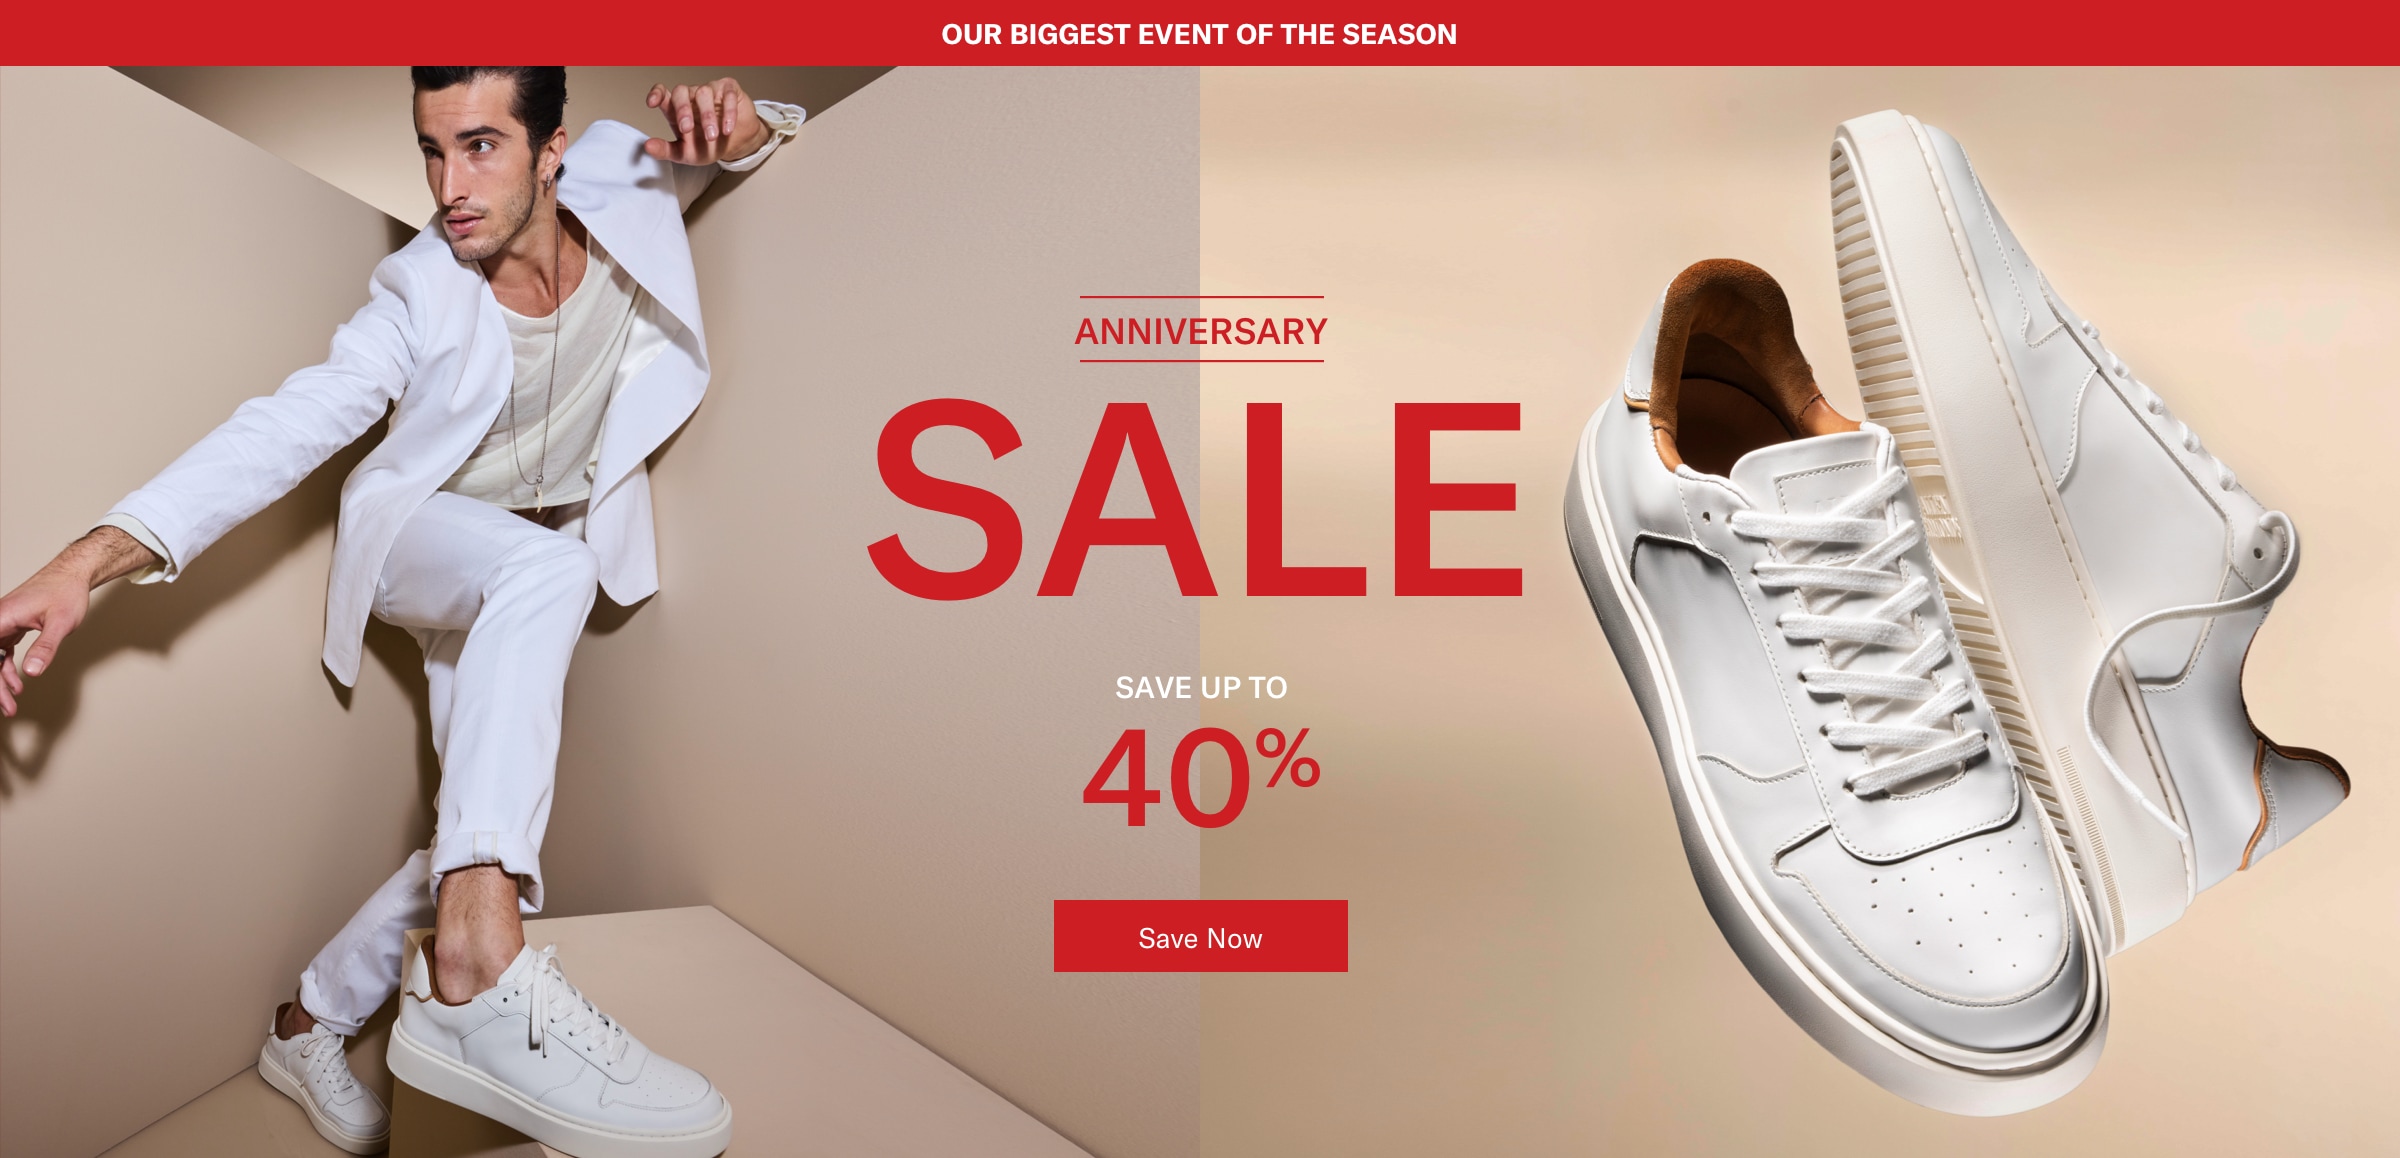 Our biggest event of the season - Anniversary Sale - Save up to 40%